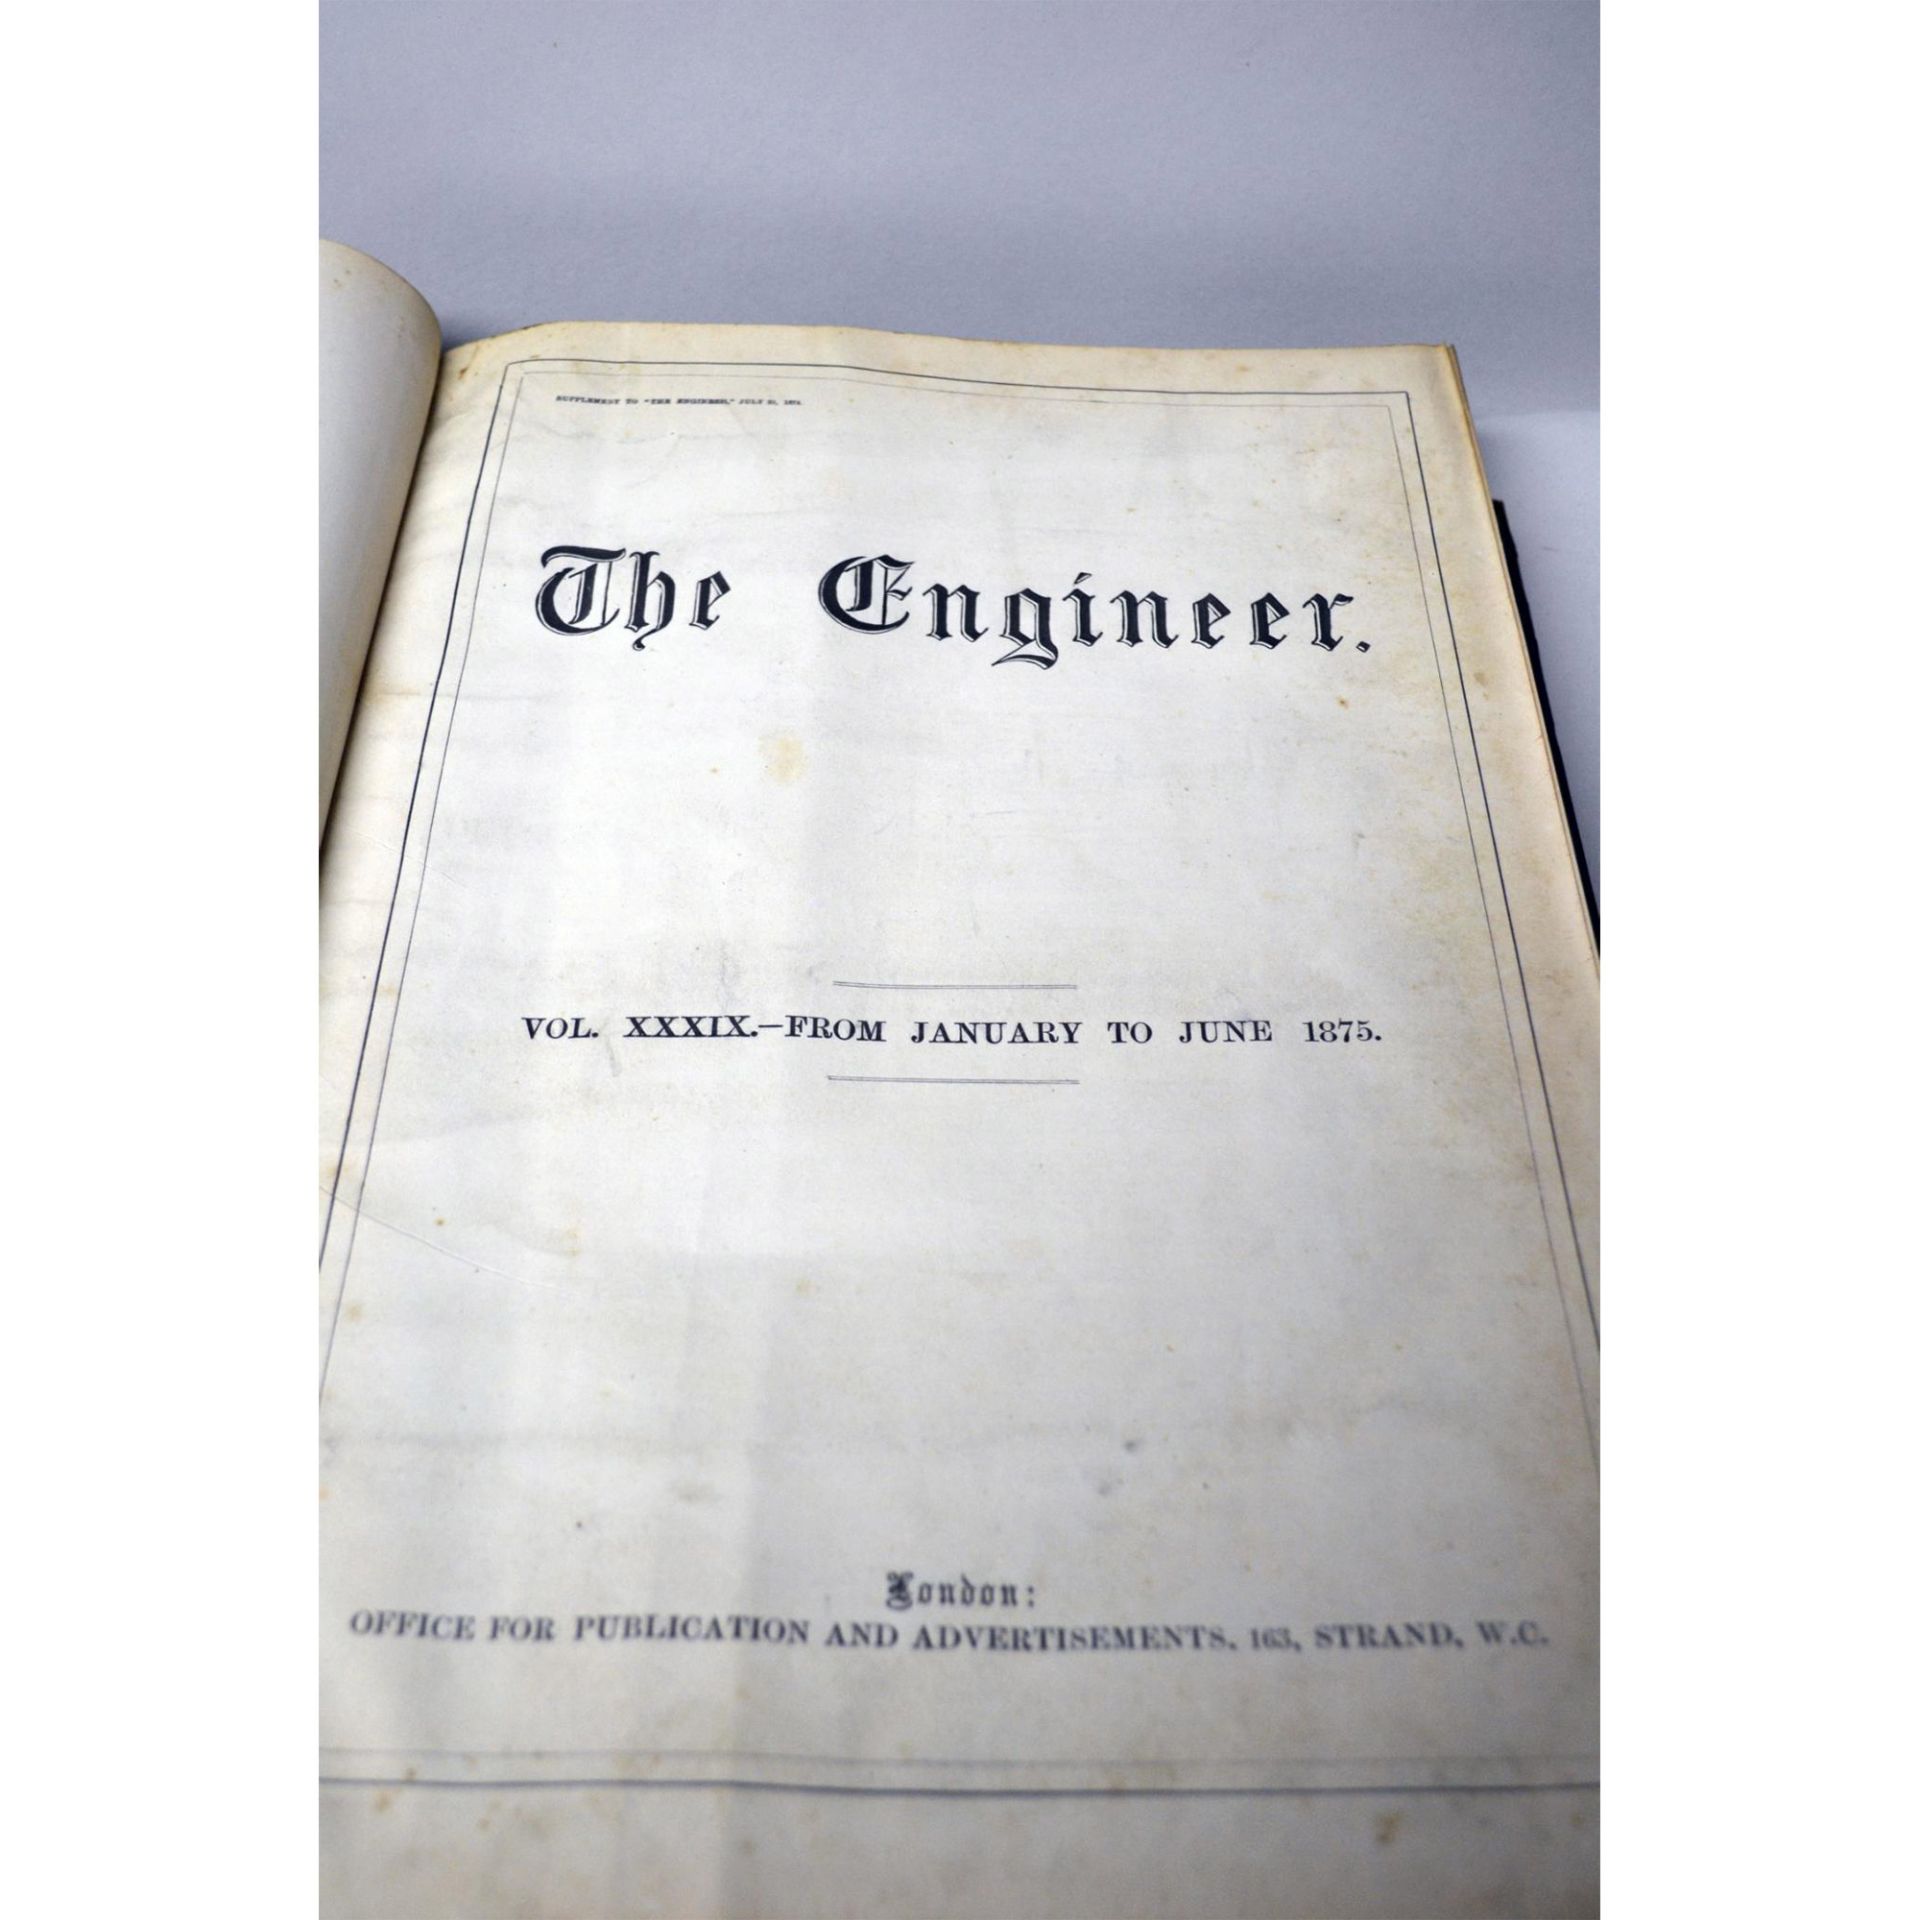 Antique Rare Book, "The Engineer" Circa 1875, Vol. Xxxix, With Engravings - Image 3 of 6